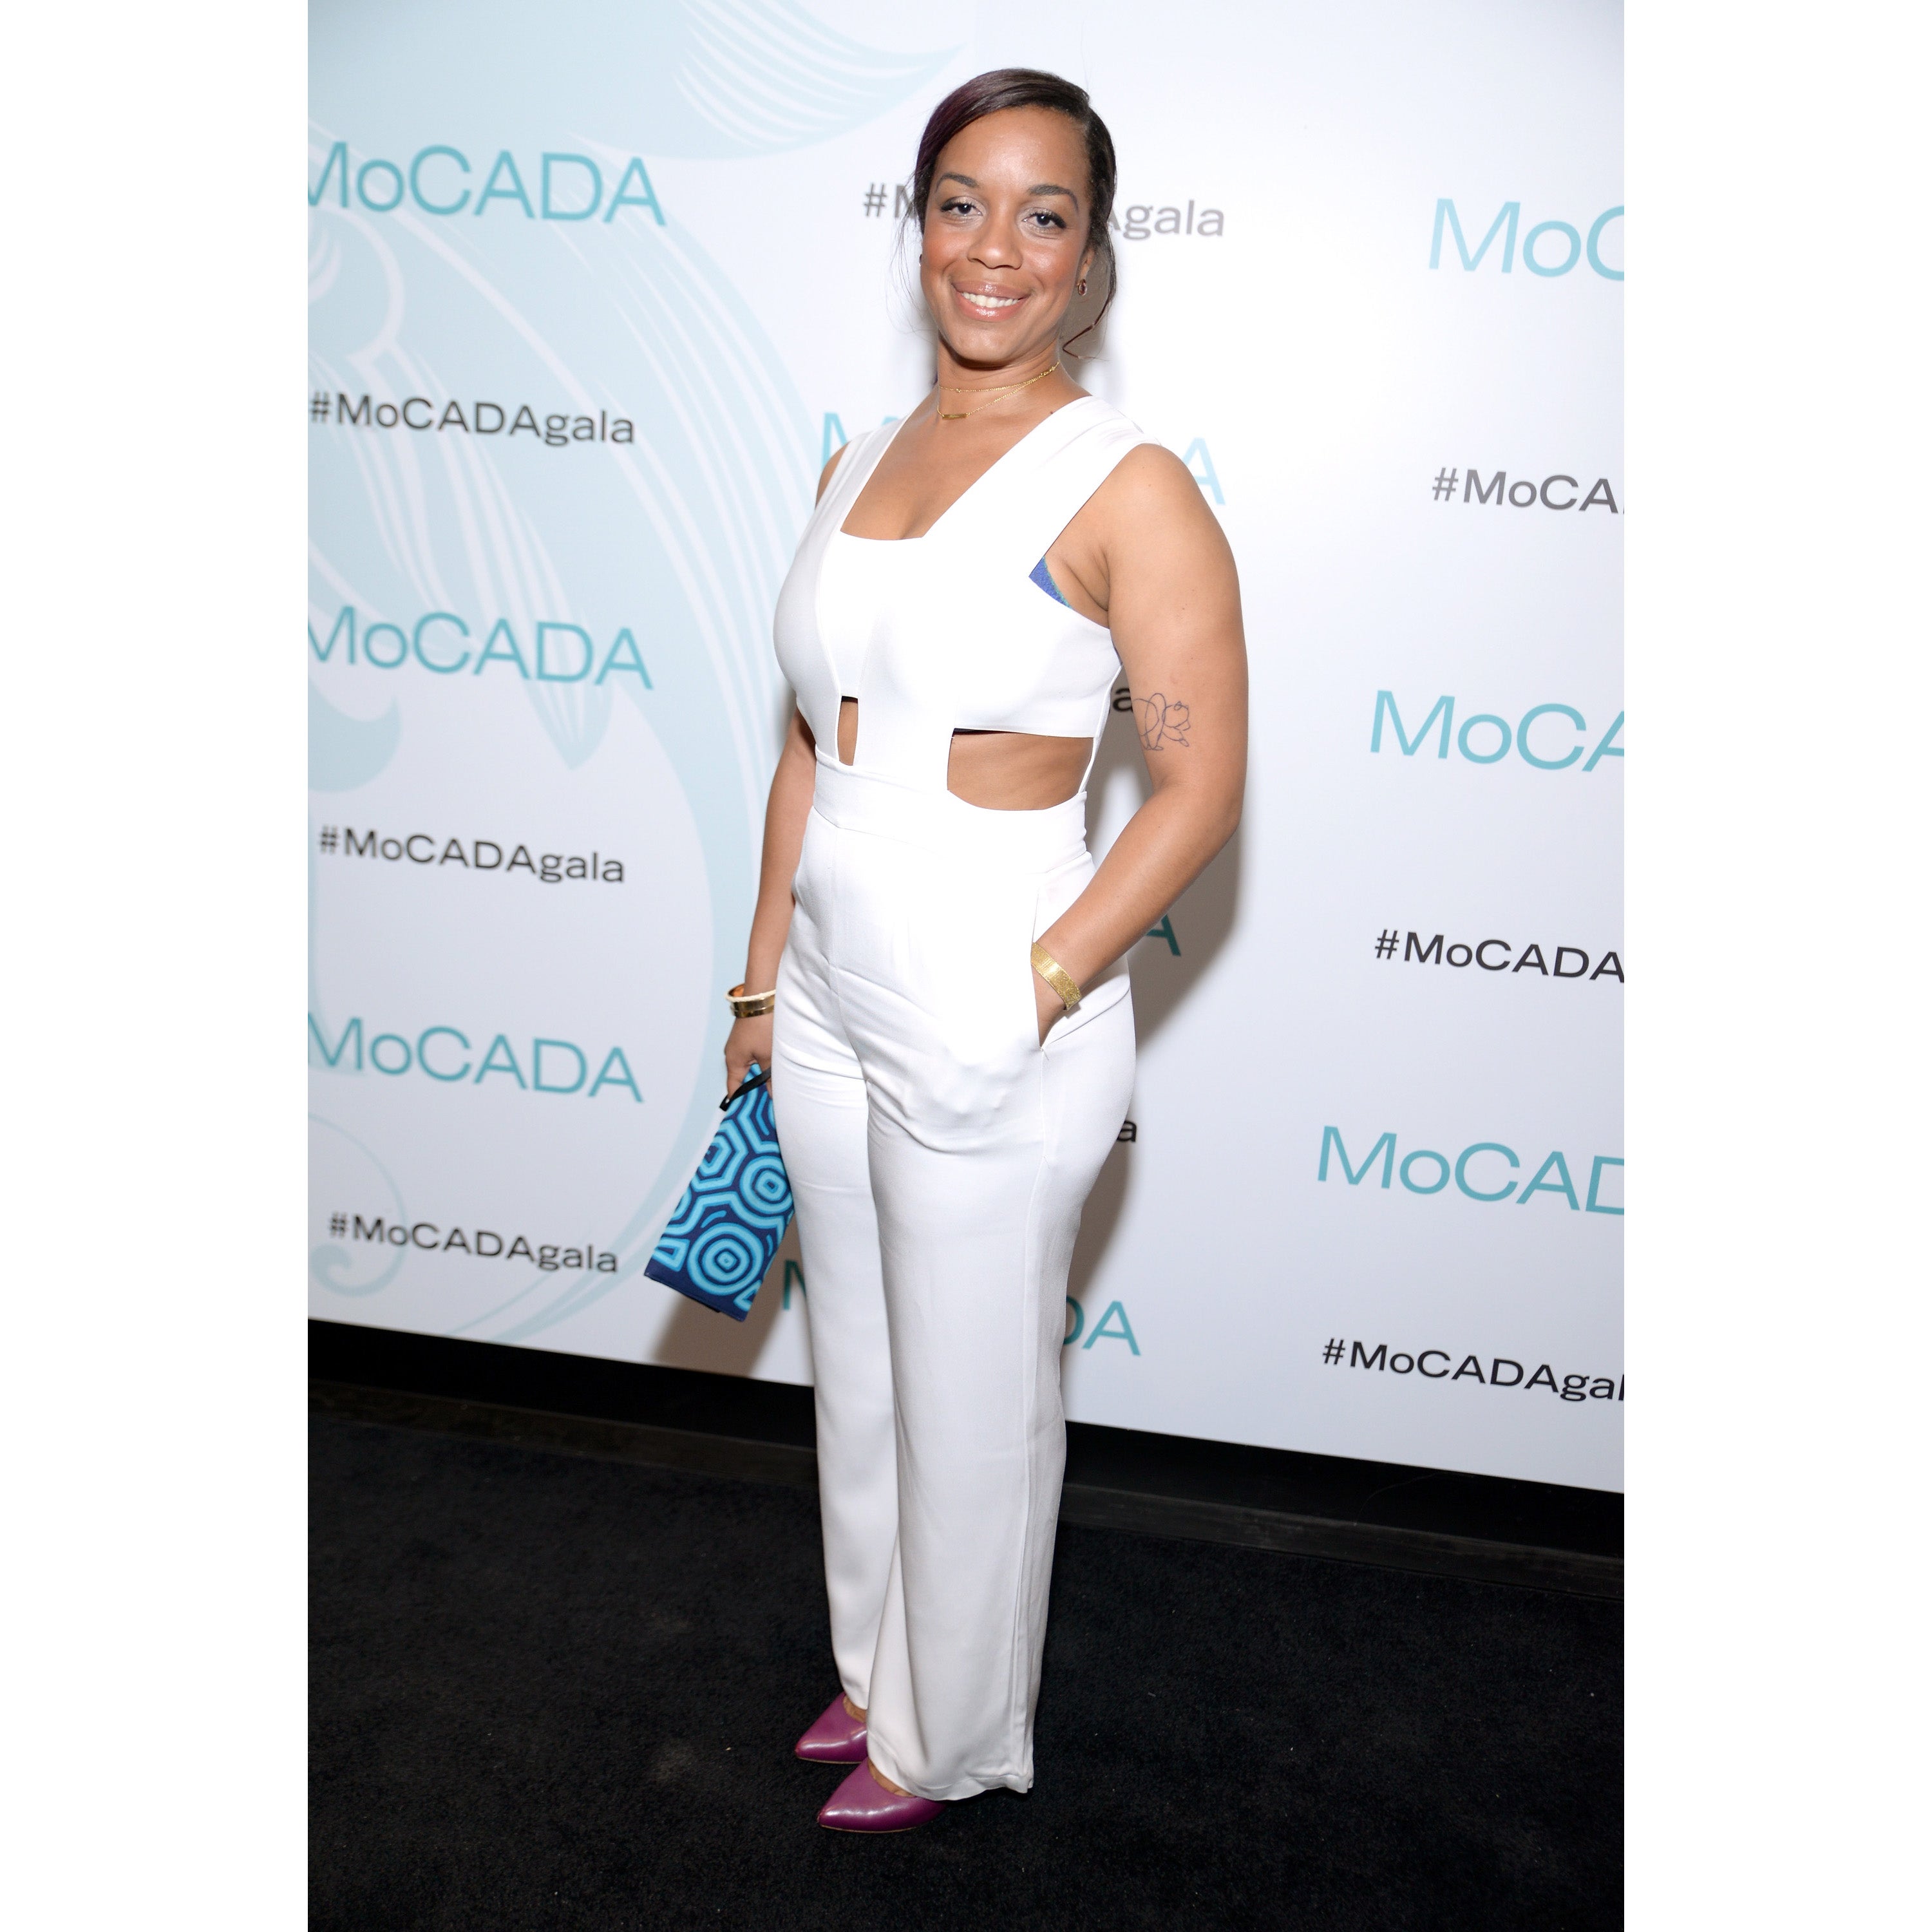 Stars Get Glam for The MoCADA 2nd ANNUAL Masquerade Ball
